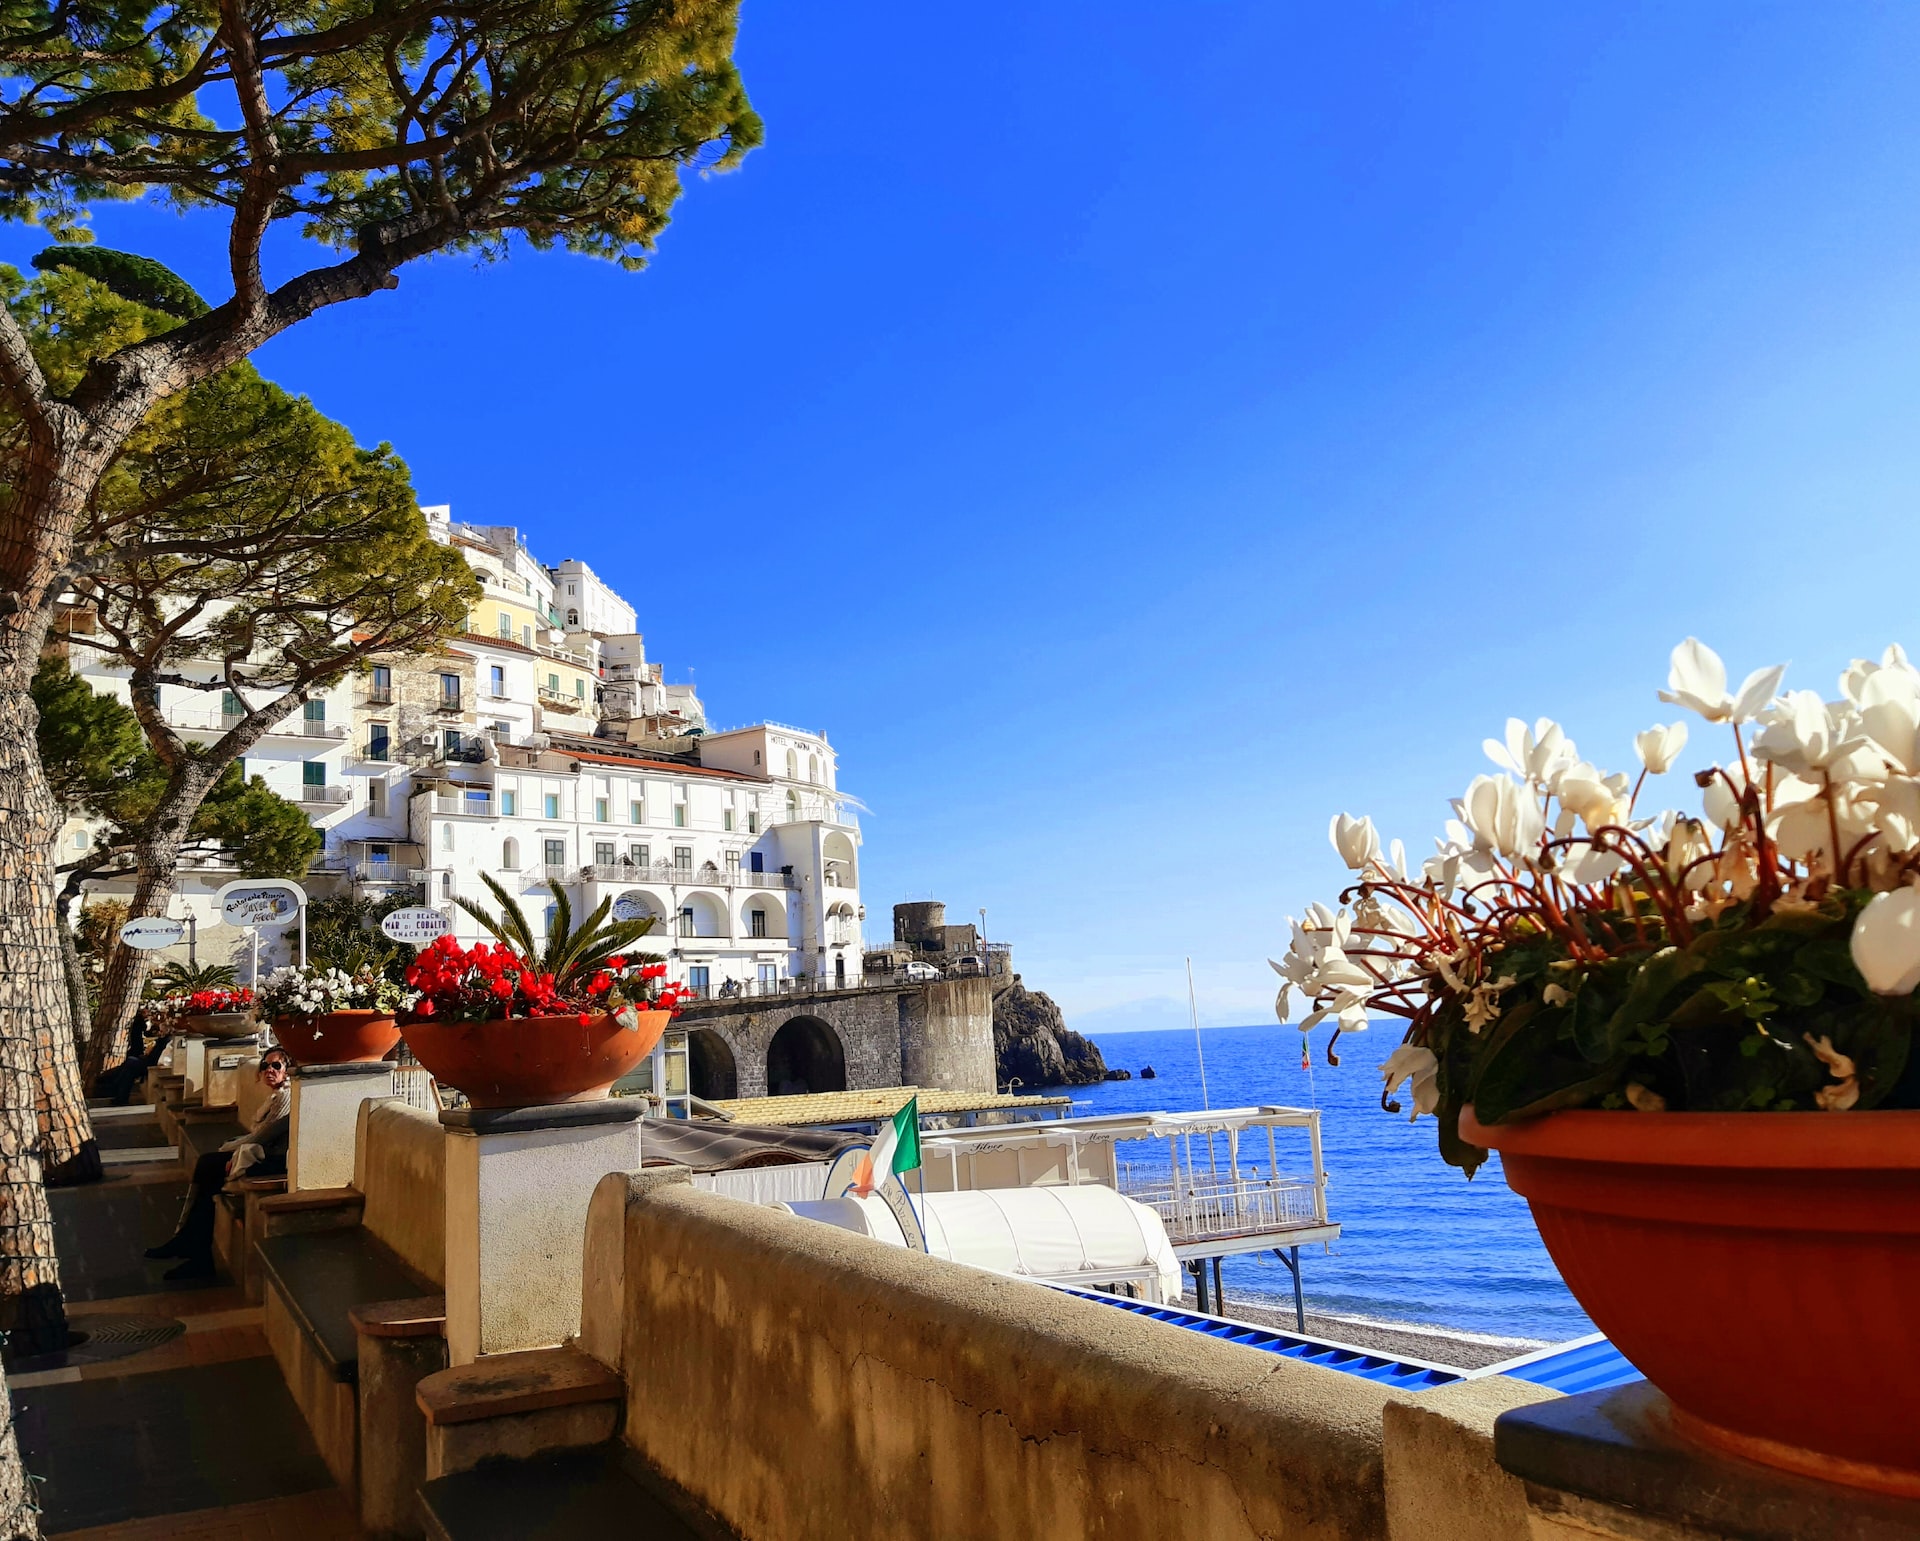 View of Amalfi Italy